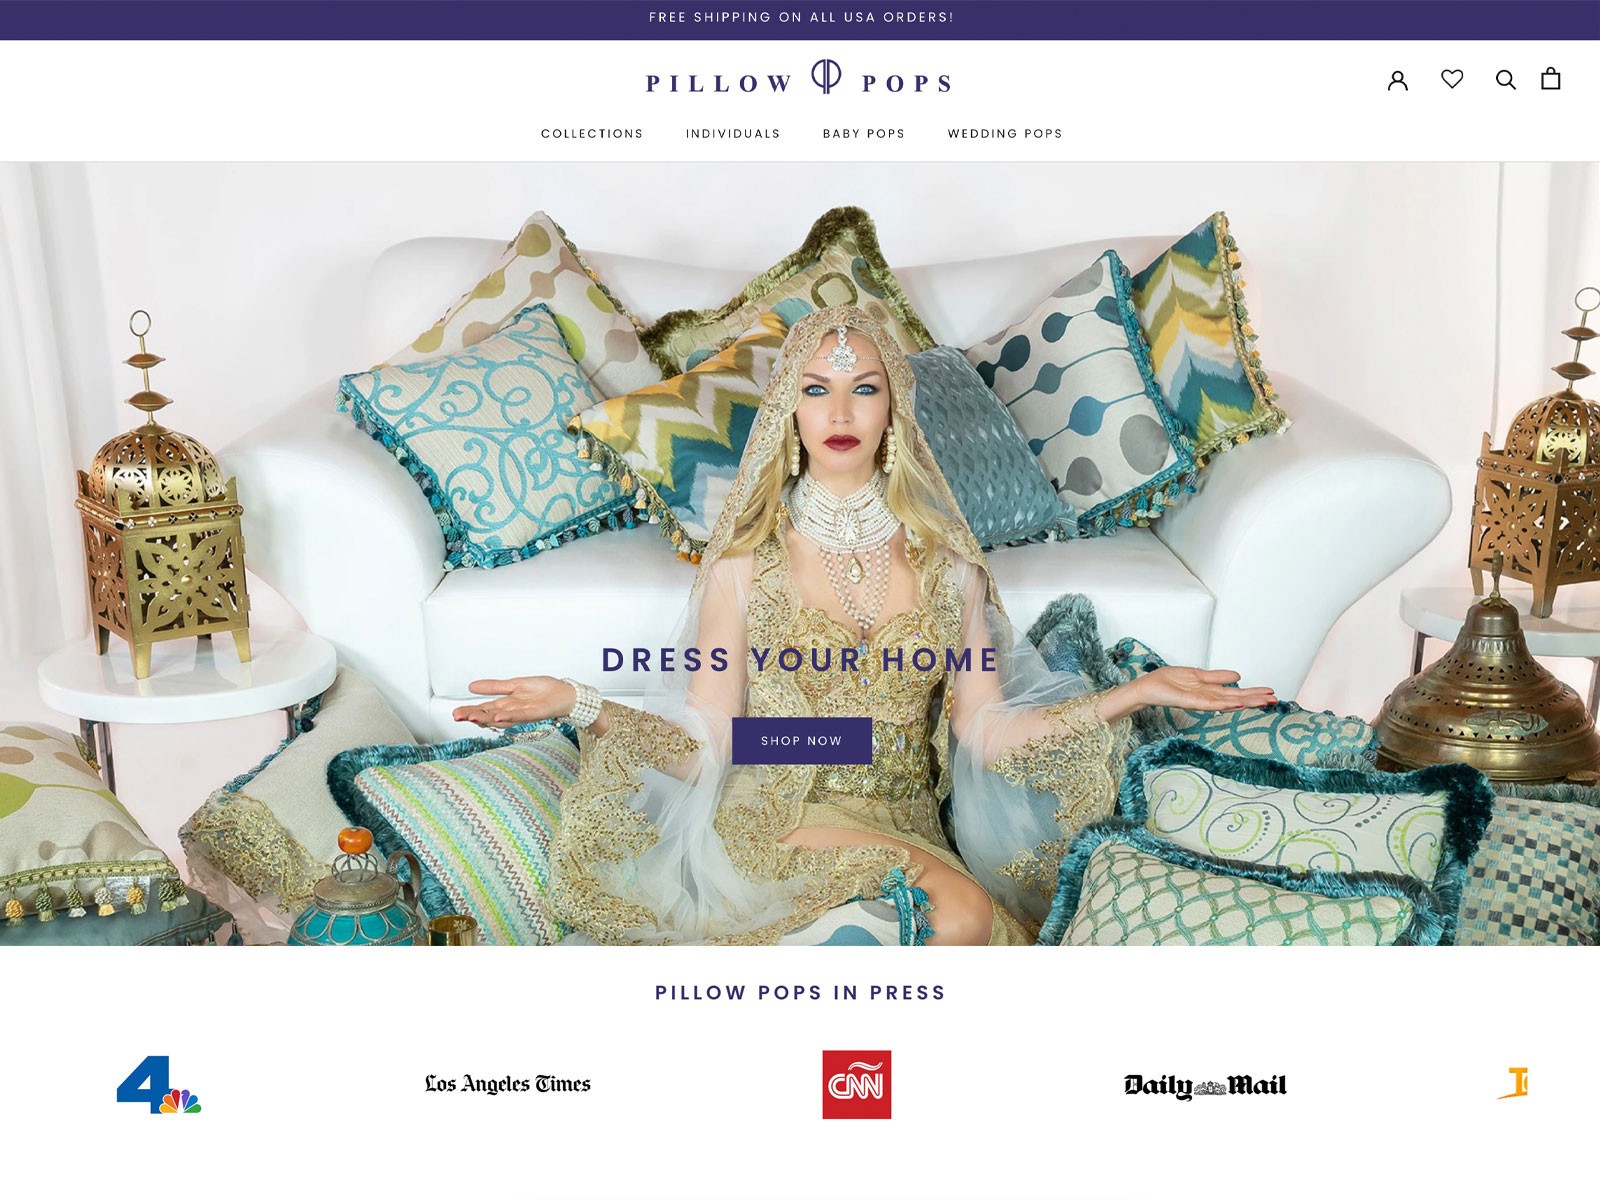 Shani Moran founded Pillow Pops with the goal of empowering people to express their personal style through home decor. 